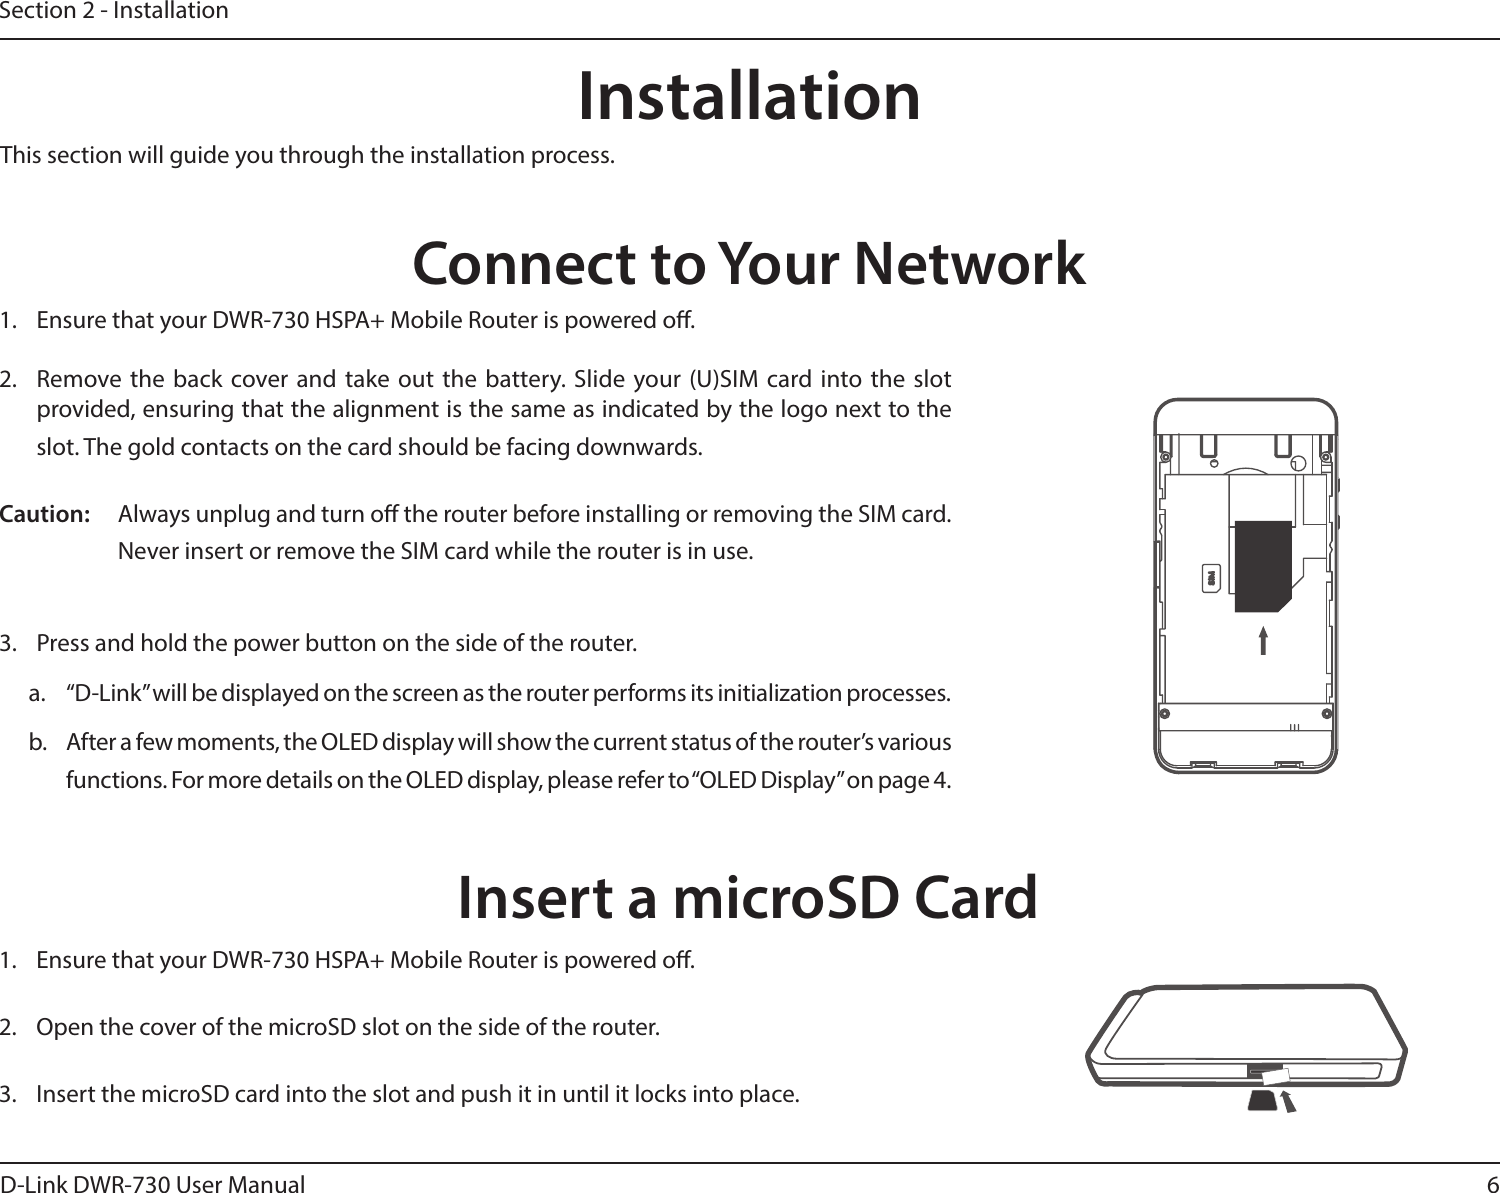 6D-Link DWR-730 User ManualSection 2 - InstallationConnect to Your NetworkInstallationThis section will guide you through the installation process.1.  Ensure that your DWR-730 HSPA+ Mobile Router is powered o.2.  Remove  the back  cover and take  out  the  battery. Slide your (U)SIM card into the slot provided, ensuring that the alignment is the same as indicated by the logo next to the slot. The gold contacts on the card should be facing downwards.Caution: Always unplug and turn o the router before installing or removing the SIM card. Never insert or remove the SIM card while the router is in use.3.  Press and hold the power button on the side of the router.a.  “D-Link” will be displayed on the screen as the router performs its initialization processes.b.  After a few moments, the OLED display will show the current status of the router’s various functions. For more details on the OLED display, please refer to “OLED Display” on page 4.Insert a microSD Card1.  Ensure that your DWR-730 HSPA+ Mobile Router is powered o.2.  Open the cover of the microSD slot on the side of the router.  3.  Insert the microSD card into the slot and push it in until it locks into place. 